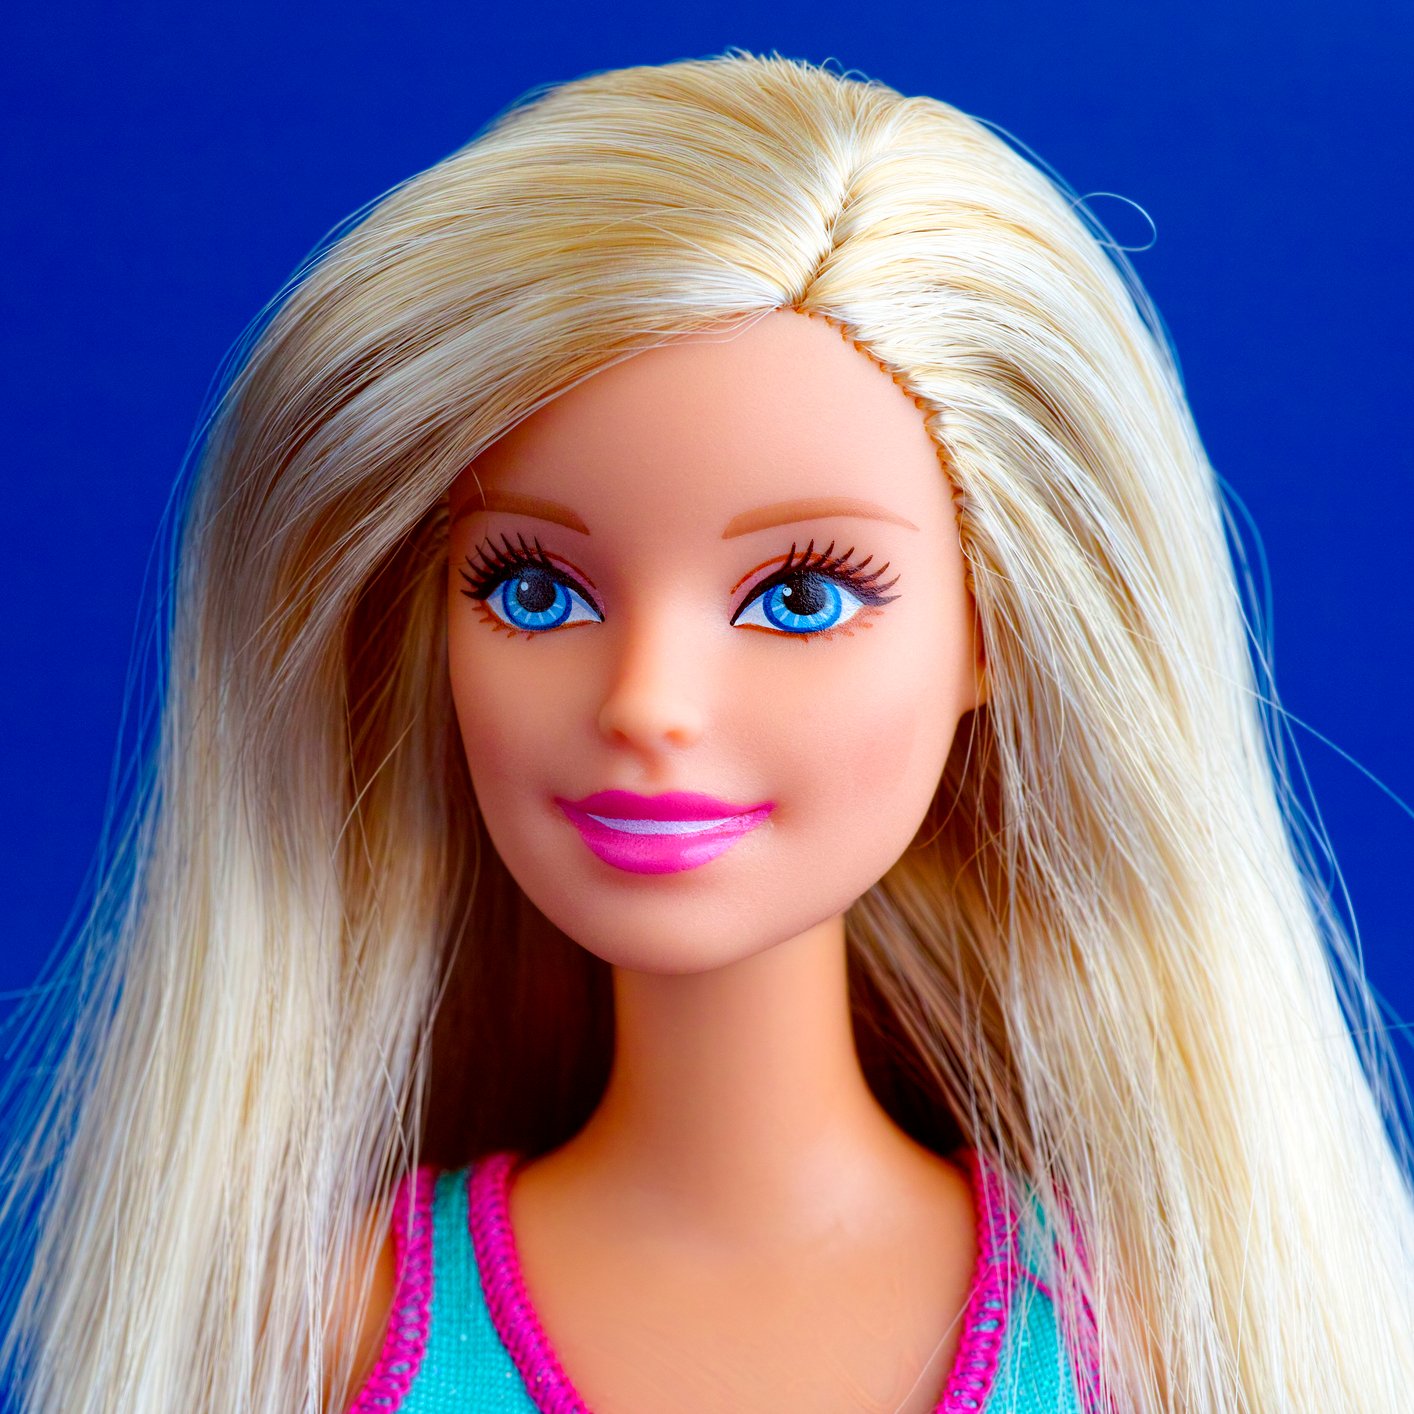 24/7 Wall St. » Blog Archive Most Popular Barbie Dolls of All Time - 24 ...